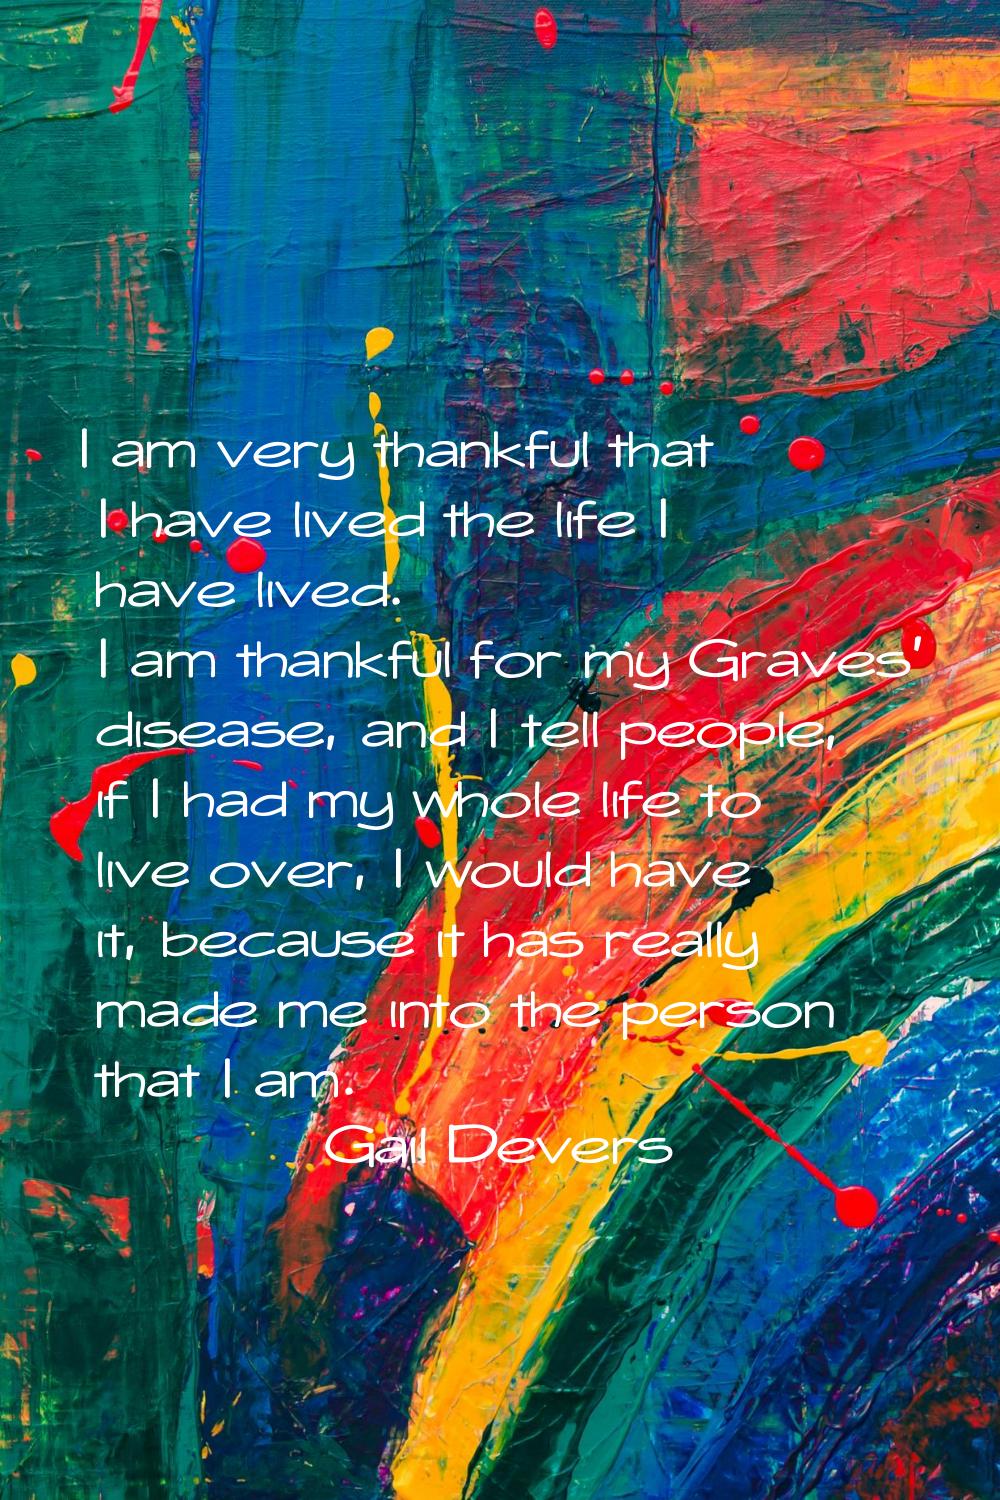 I am very thankful that I have lived the life I have lived. I am thankful for my Graves' disease, a